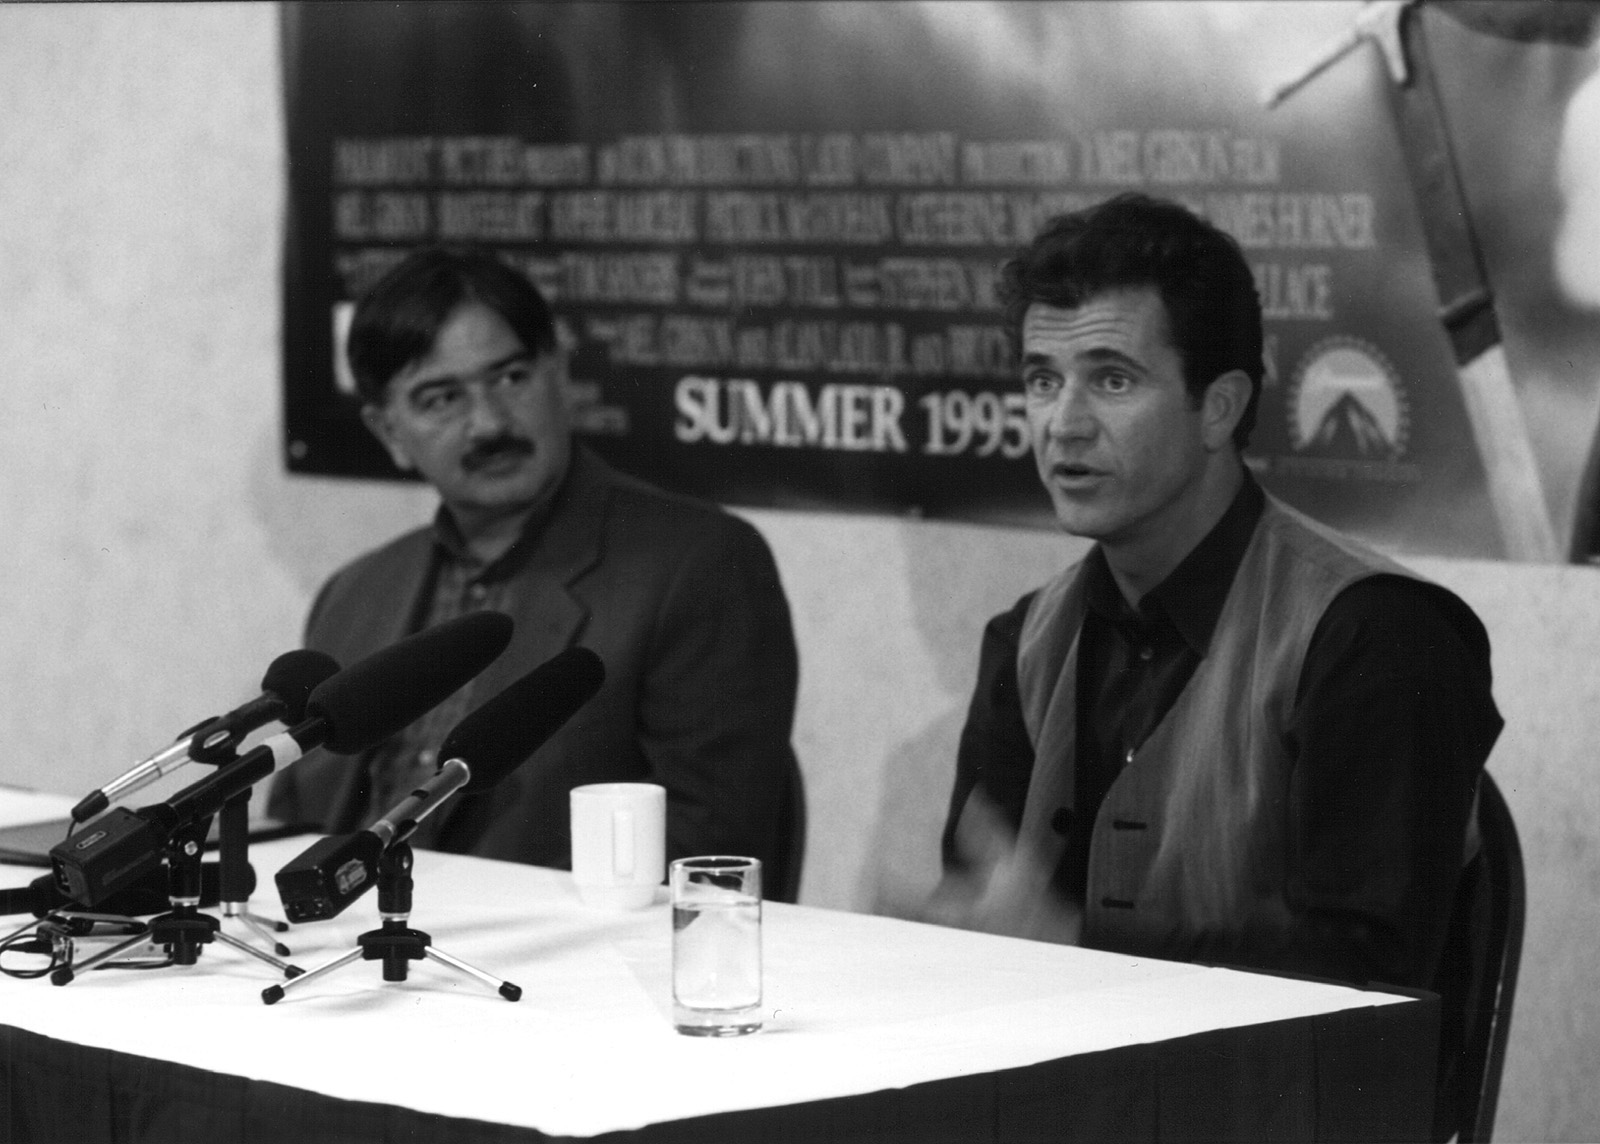 Festival founder, Darryl Macdonald, talks with actor and director, Mel Gibson, at a press conference for the world premiere of his film, Braveheart, which opened the festival and earned him an Academy Award for Best Picture